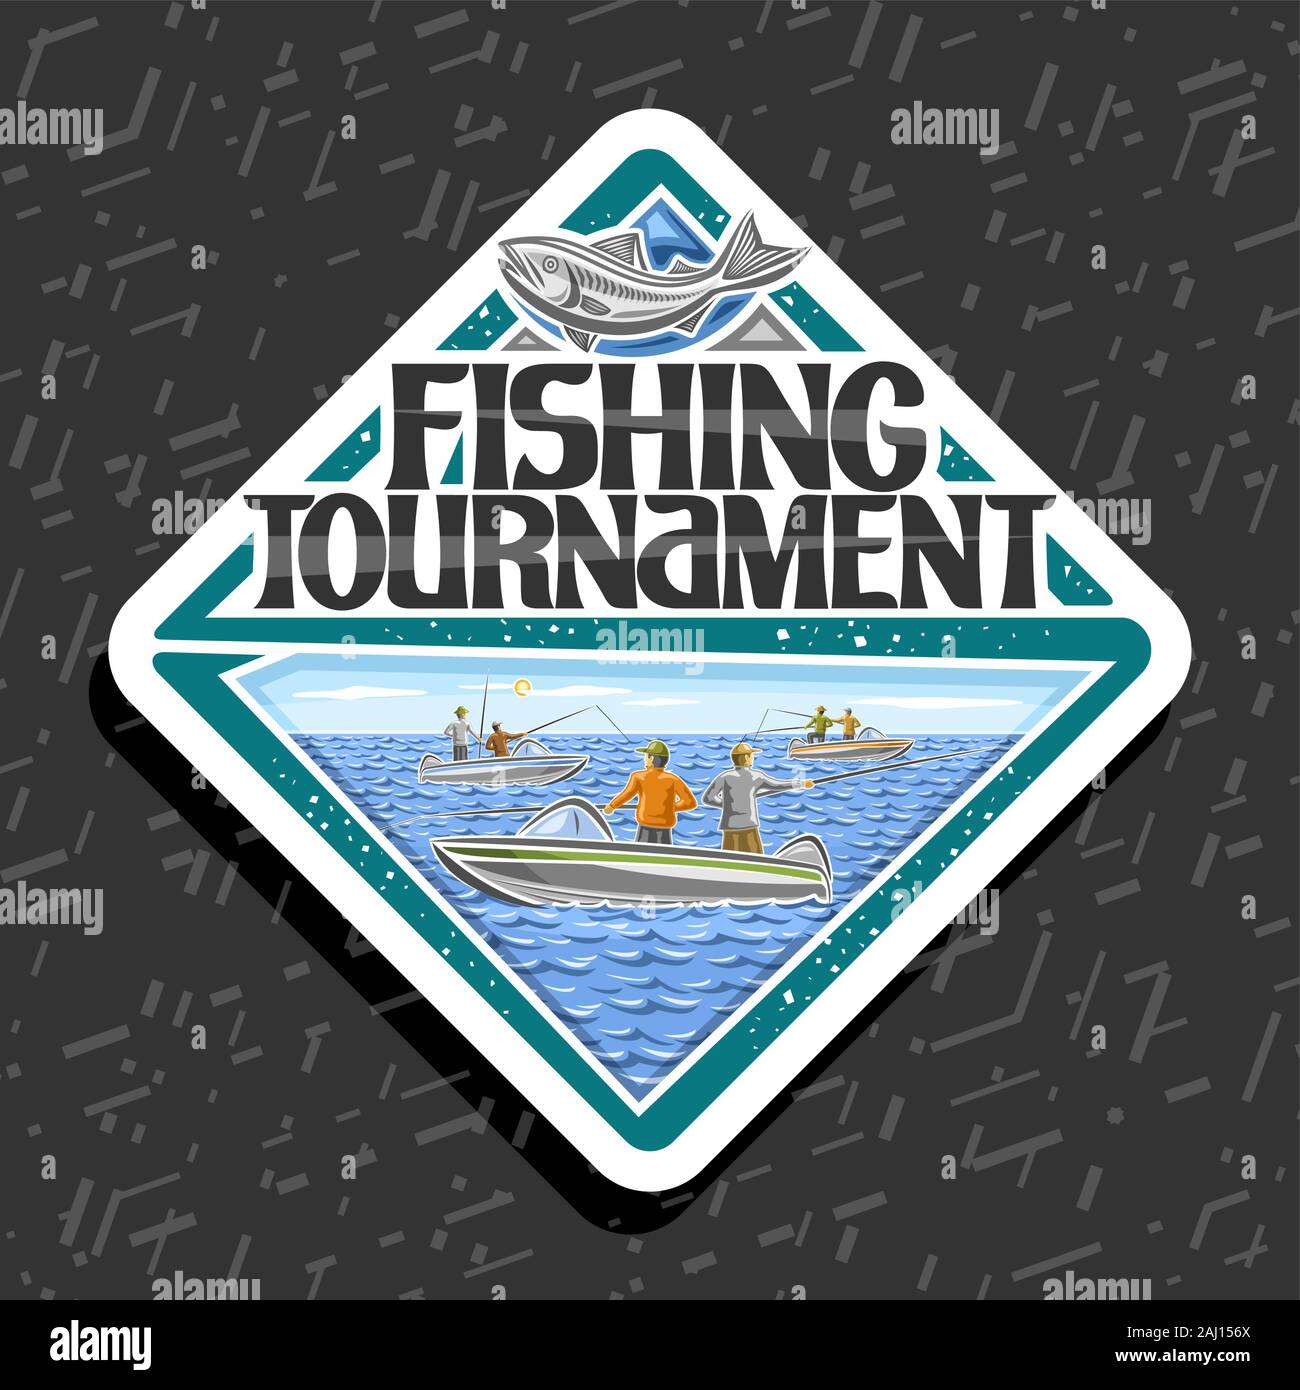 https://c8.alamy.com/comp/2AJ156X/vector-logo-for-fishing-tournament-white-decorative-rhomb-emblem-with-illustration-of-group-standing-males-in-motor-boats-tag-with-original-typeface-2AJ156X.jpg